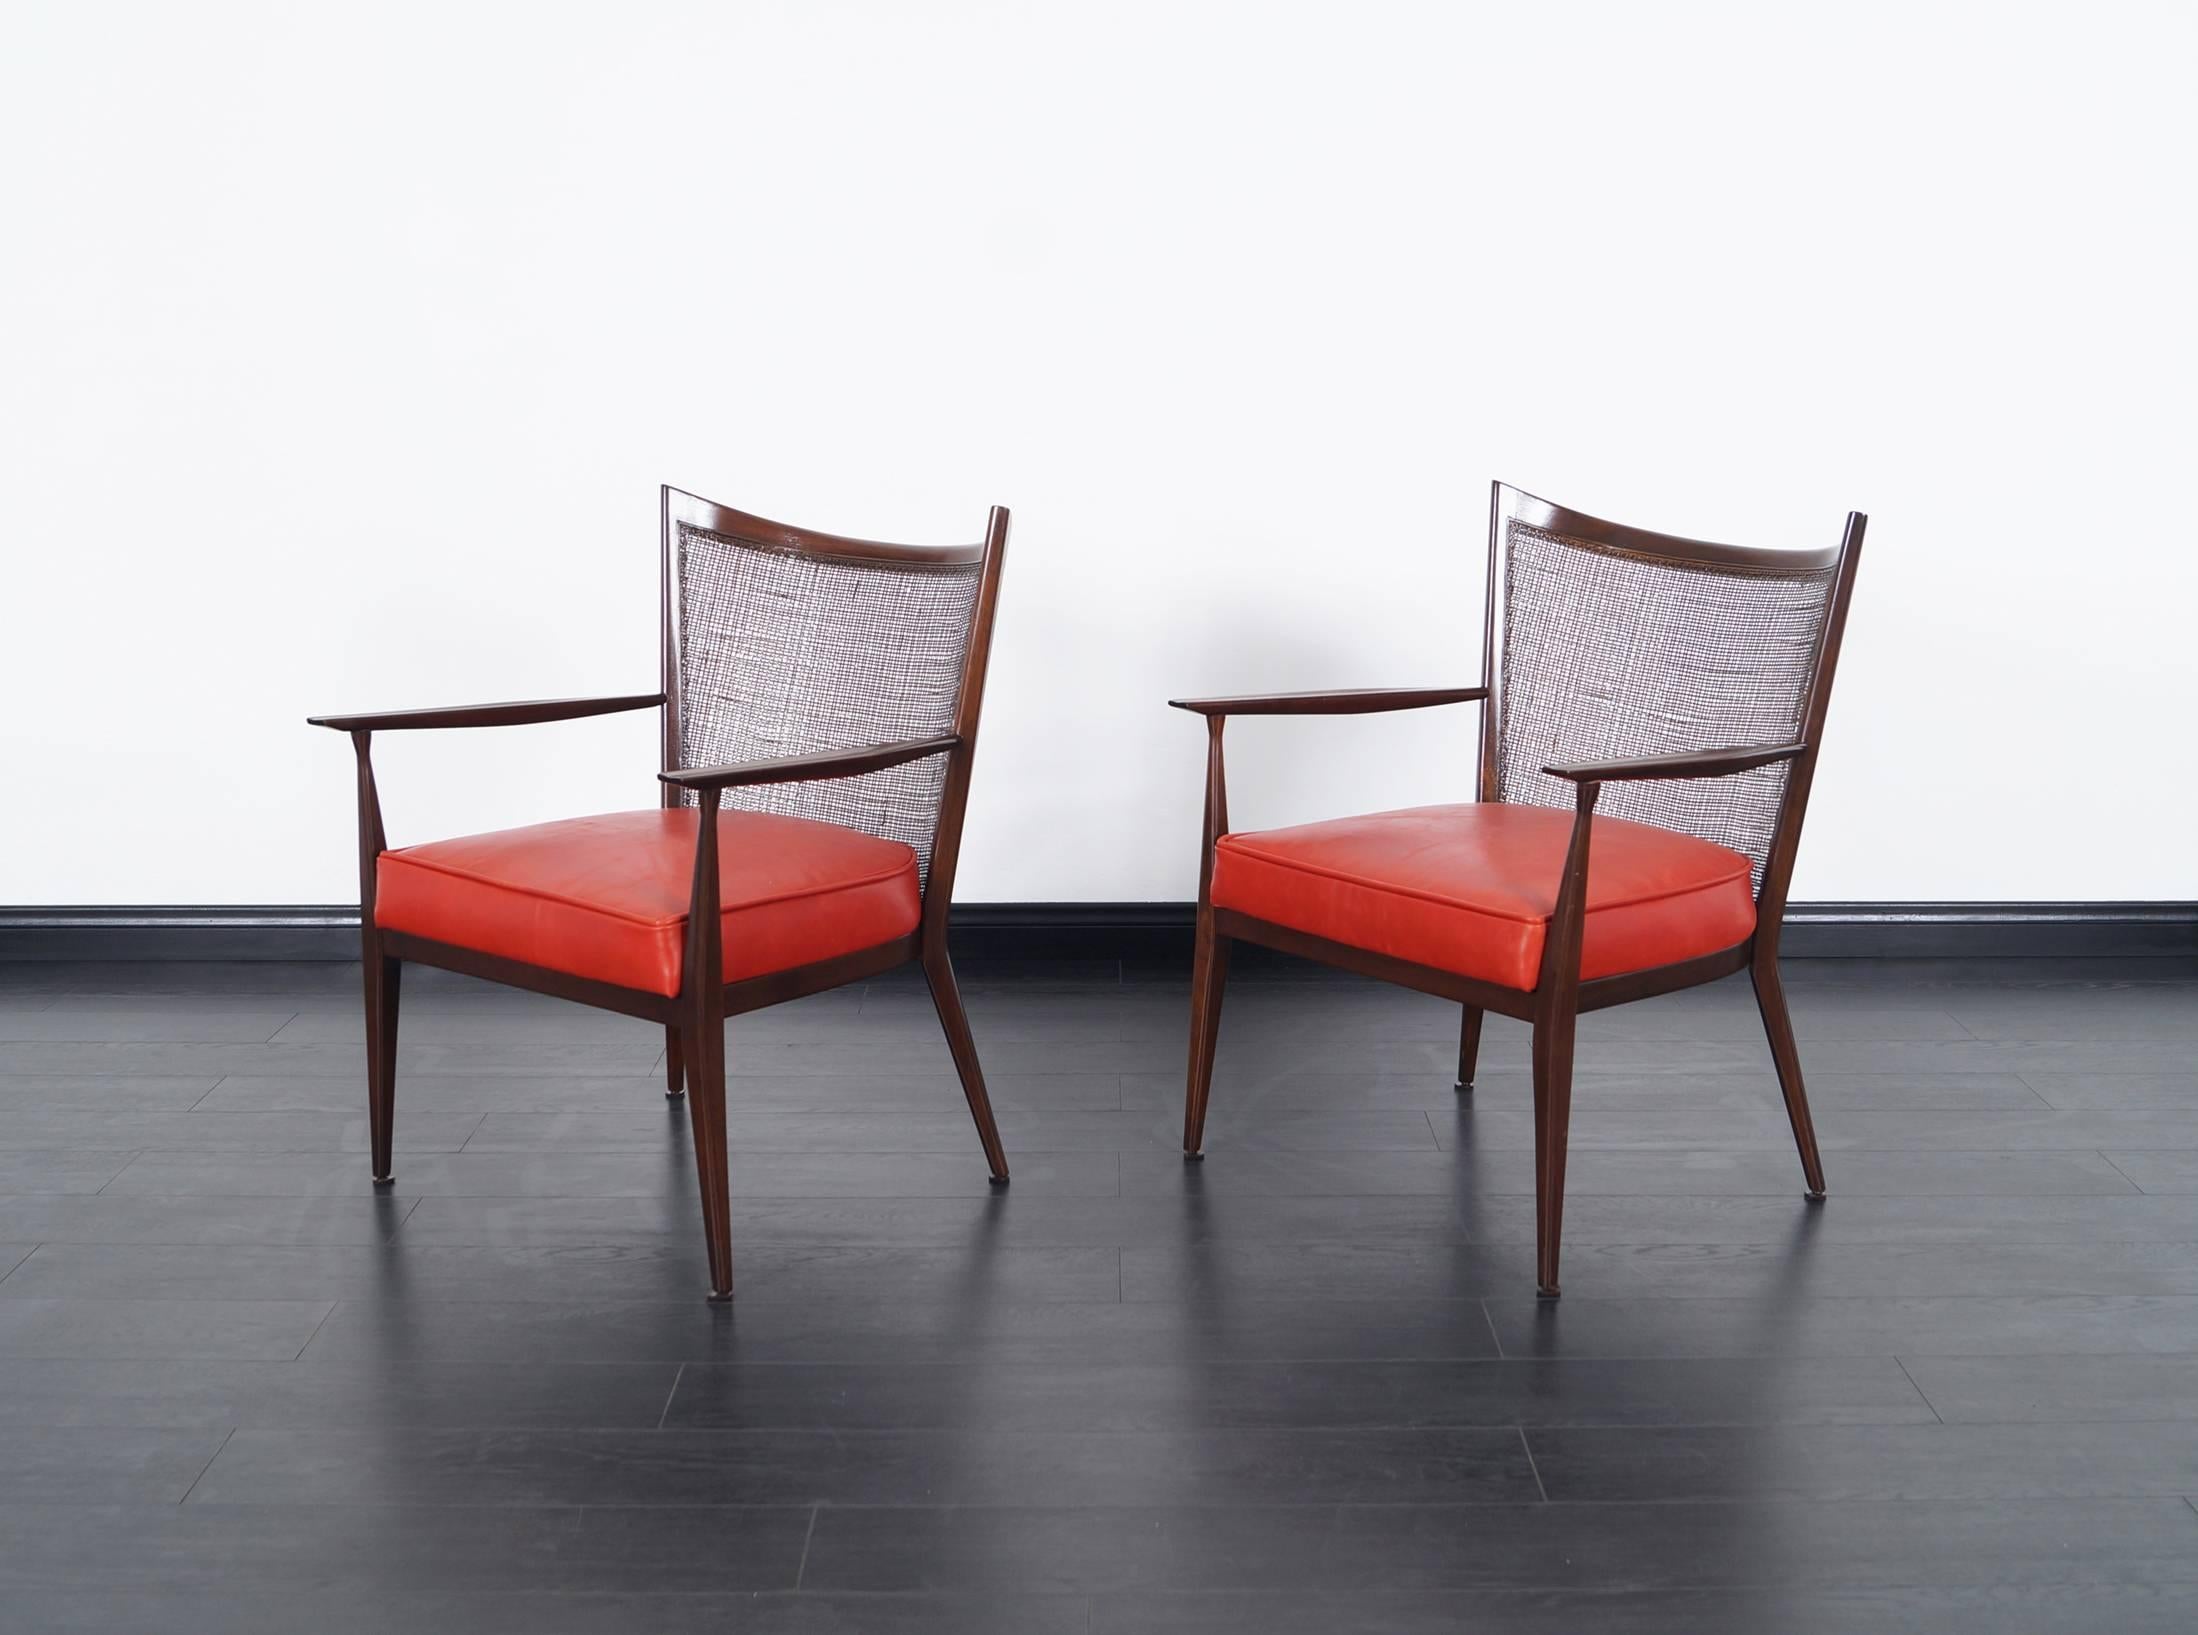 Pair of stunning lounge chairs designed by Paul McCobb for Directional. Newly reupholstered in a red-orange leather.